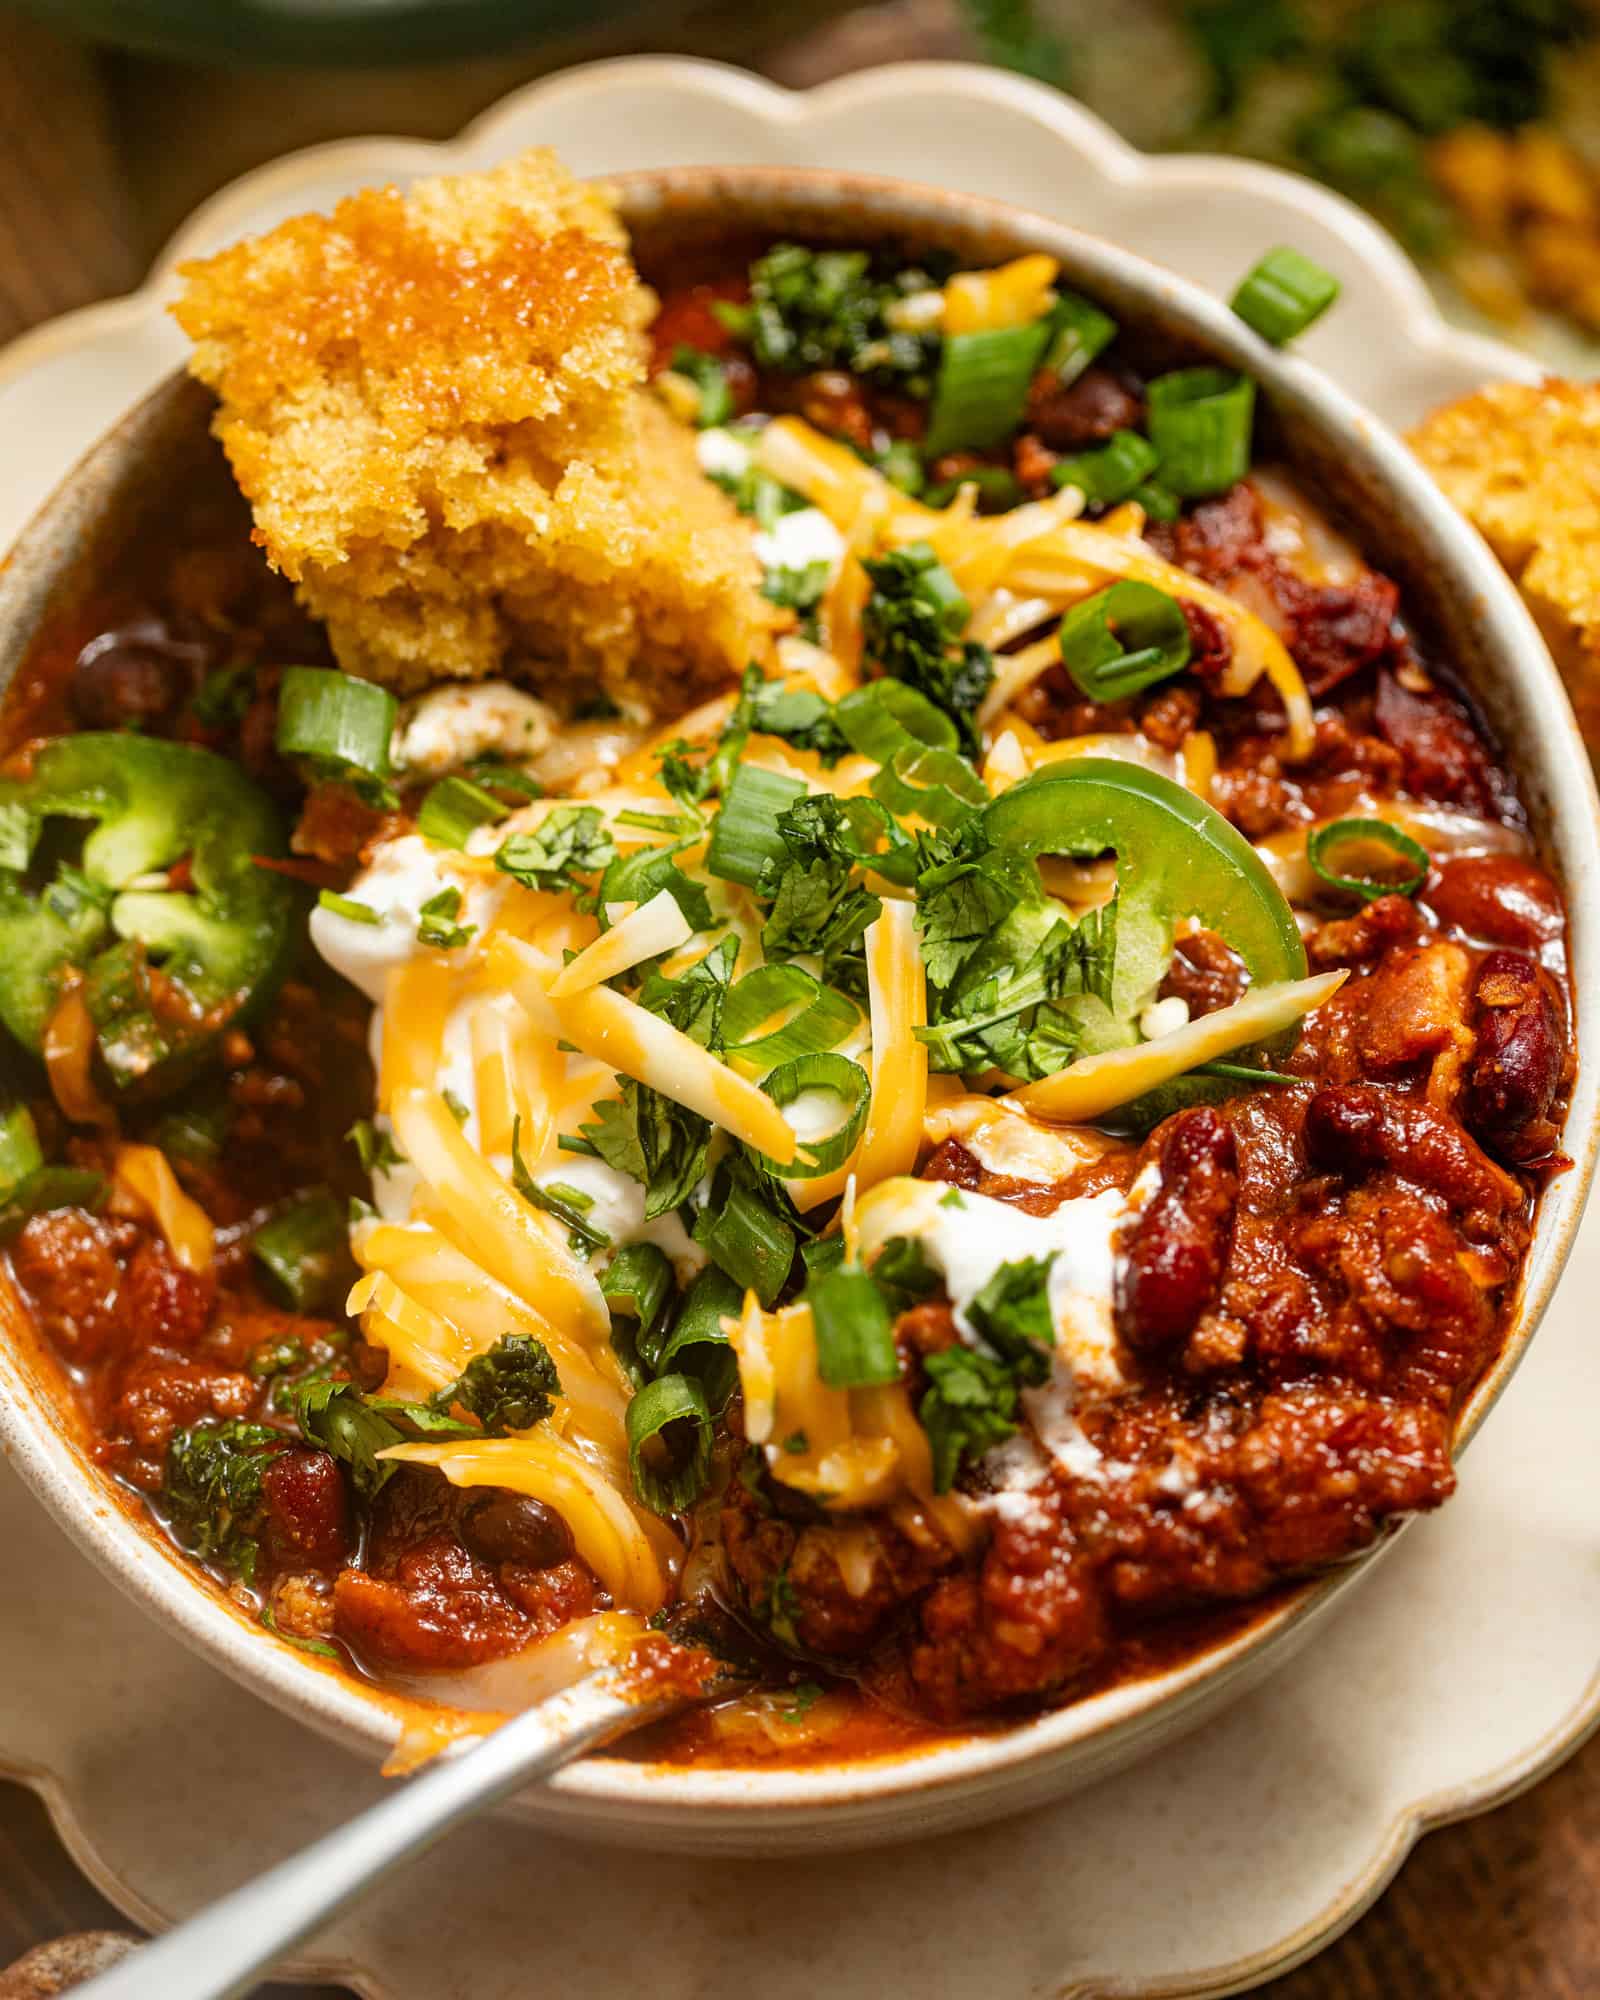 Cooked-all-day-tasting chili in under 30 mins? Watch this magic trick